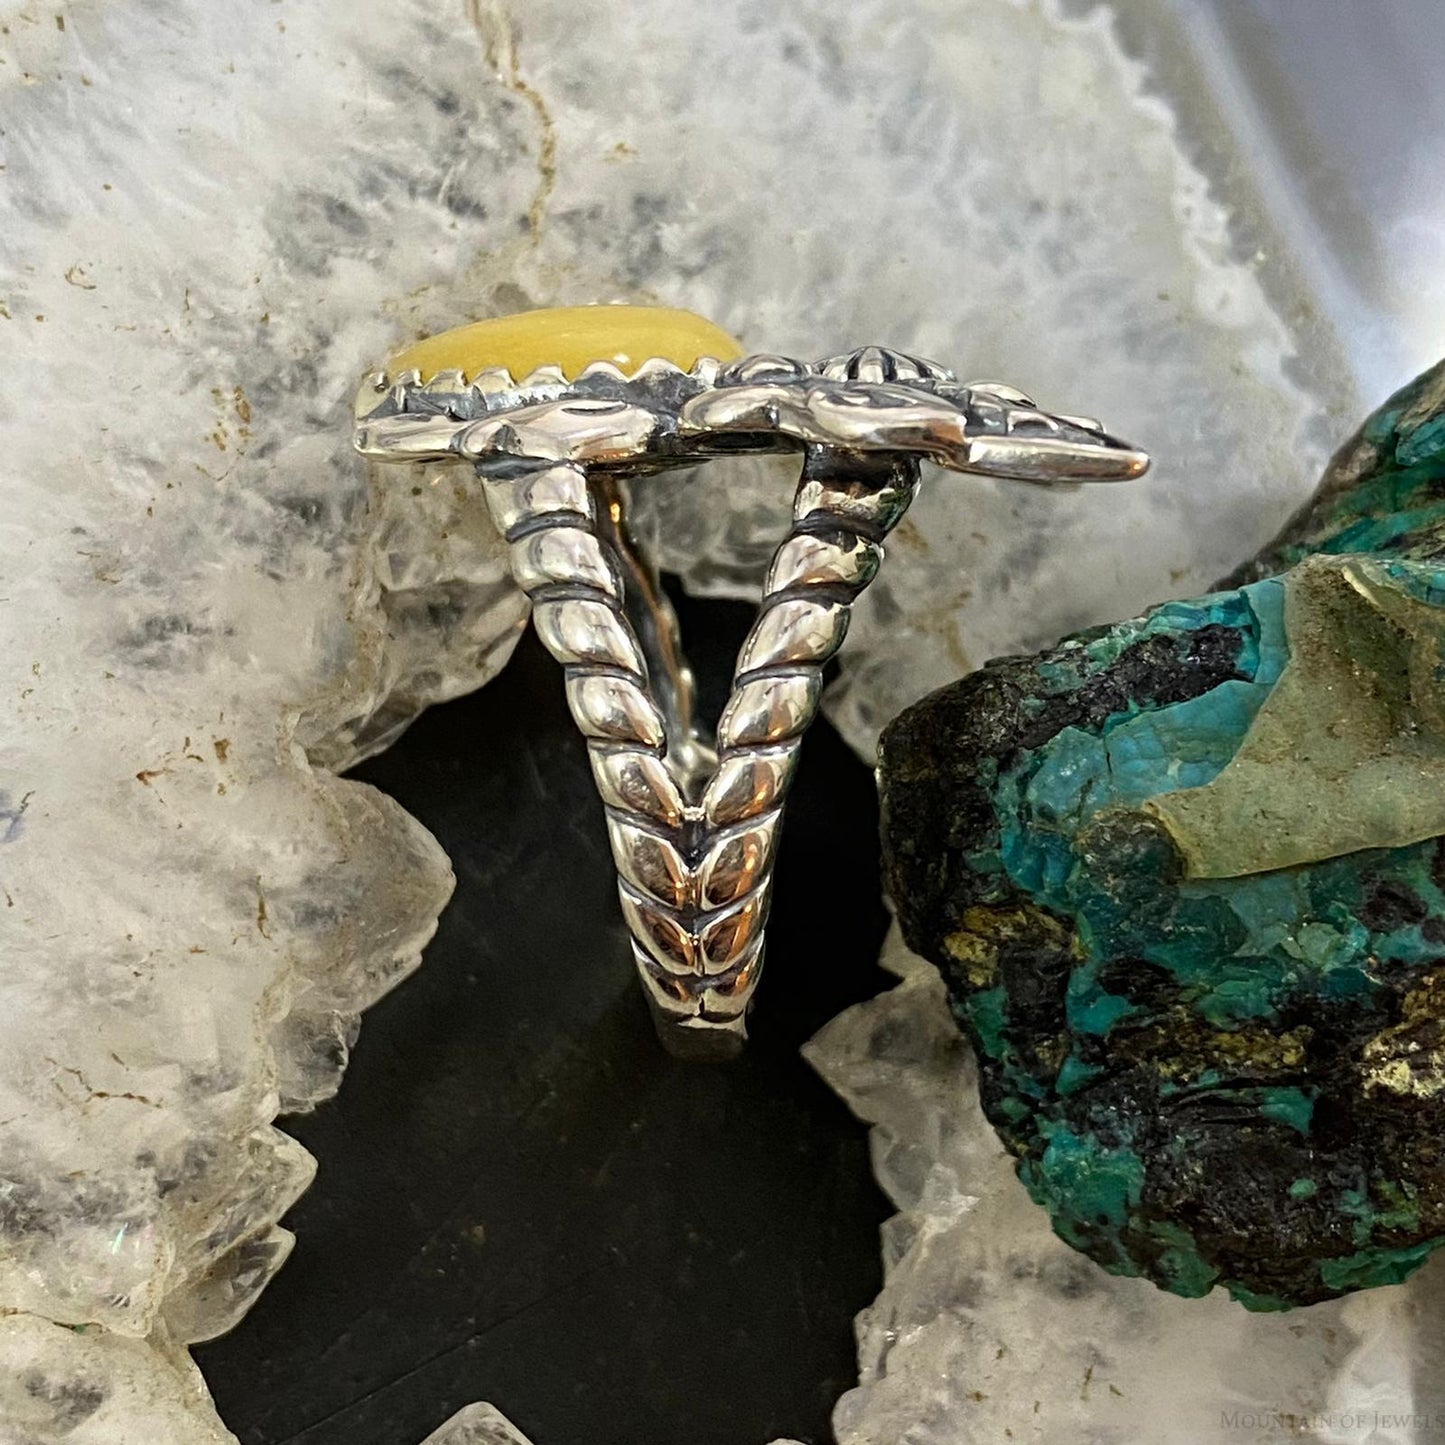 Carolyn Pollack Southwestern Style Sterling Silver Yellow Jasper Bee Ring For Women, Variety of Sizes